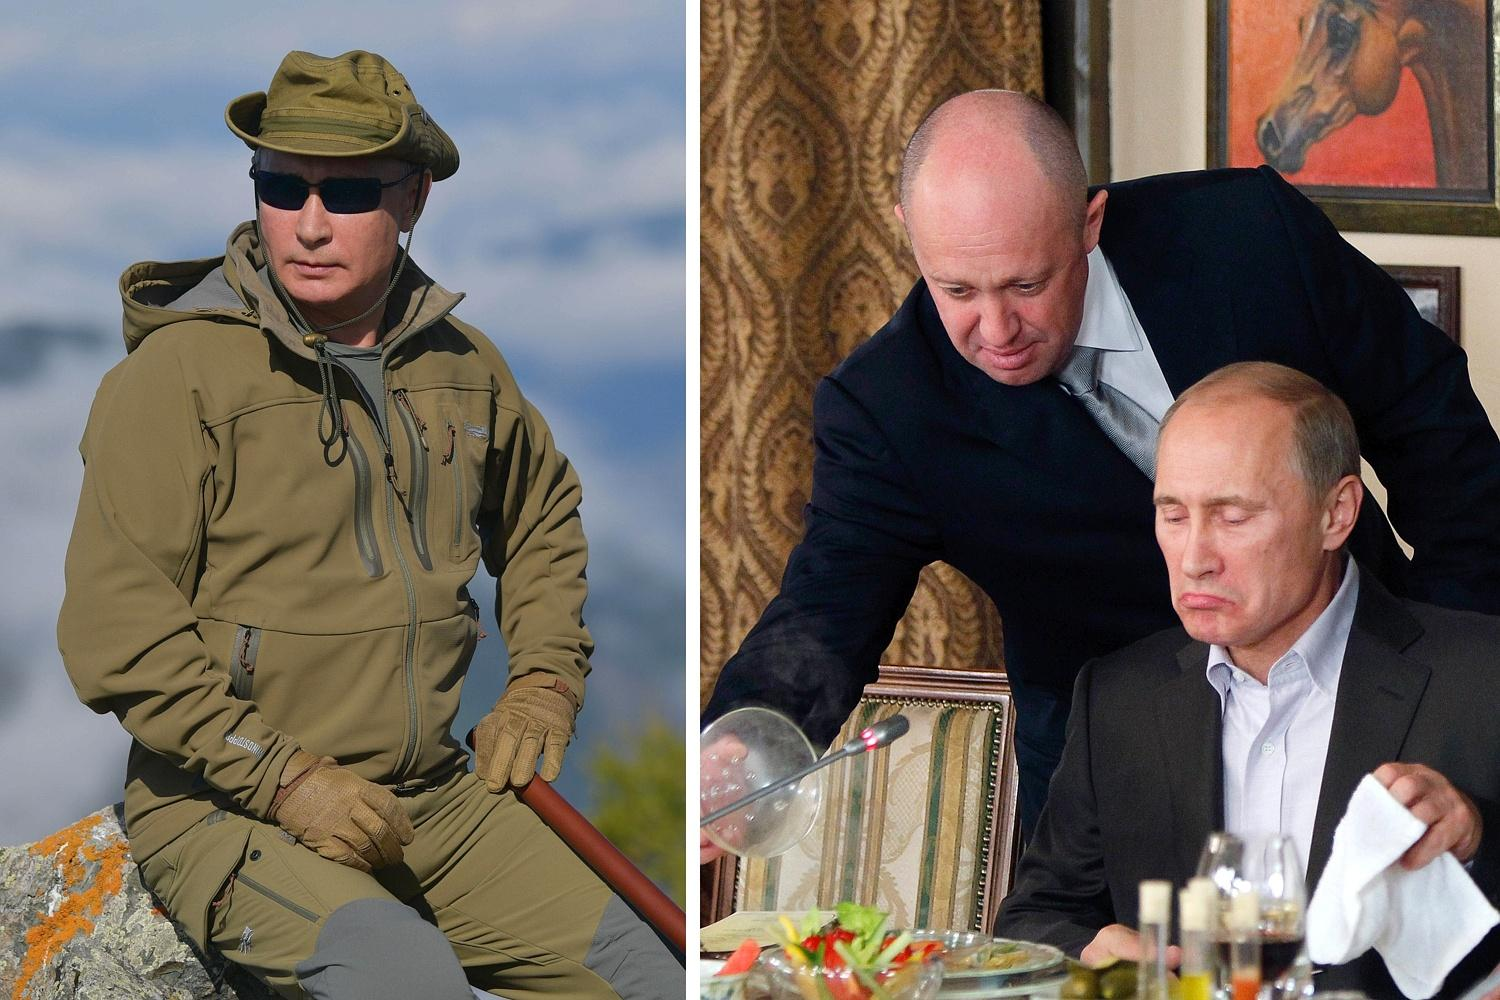 Left: Putin on holiday in Siberia in 2019. Right: Yevgeny Prigozhin, left, now alleged to be the man behind the Wagner Group mercenaries, serving food to Vladimir Putin at his restaurant outside Moscow in 2011